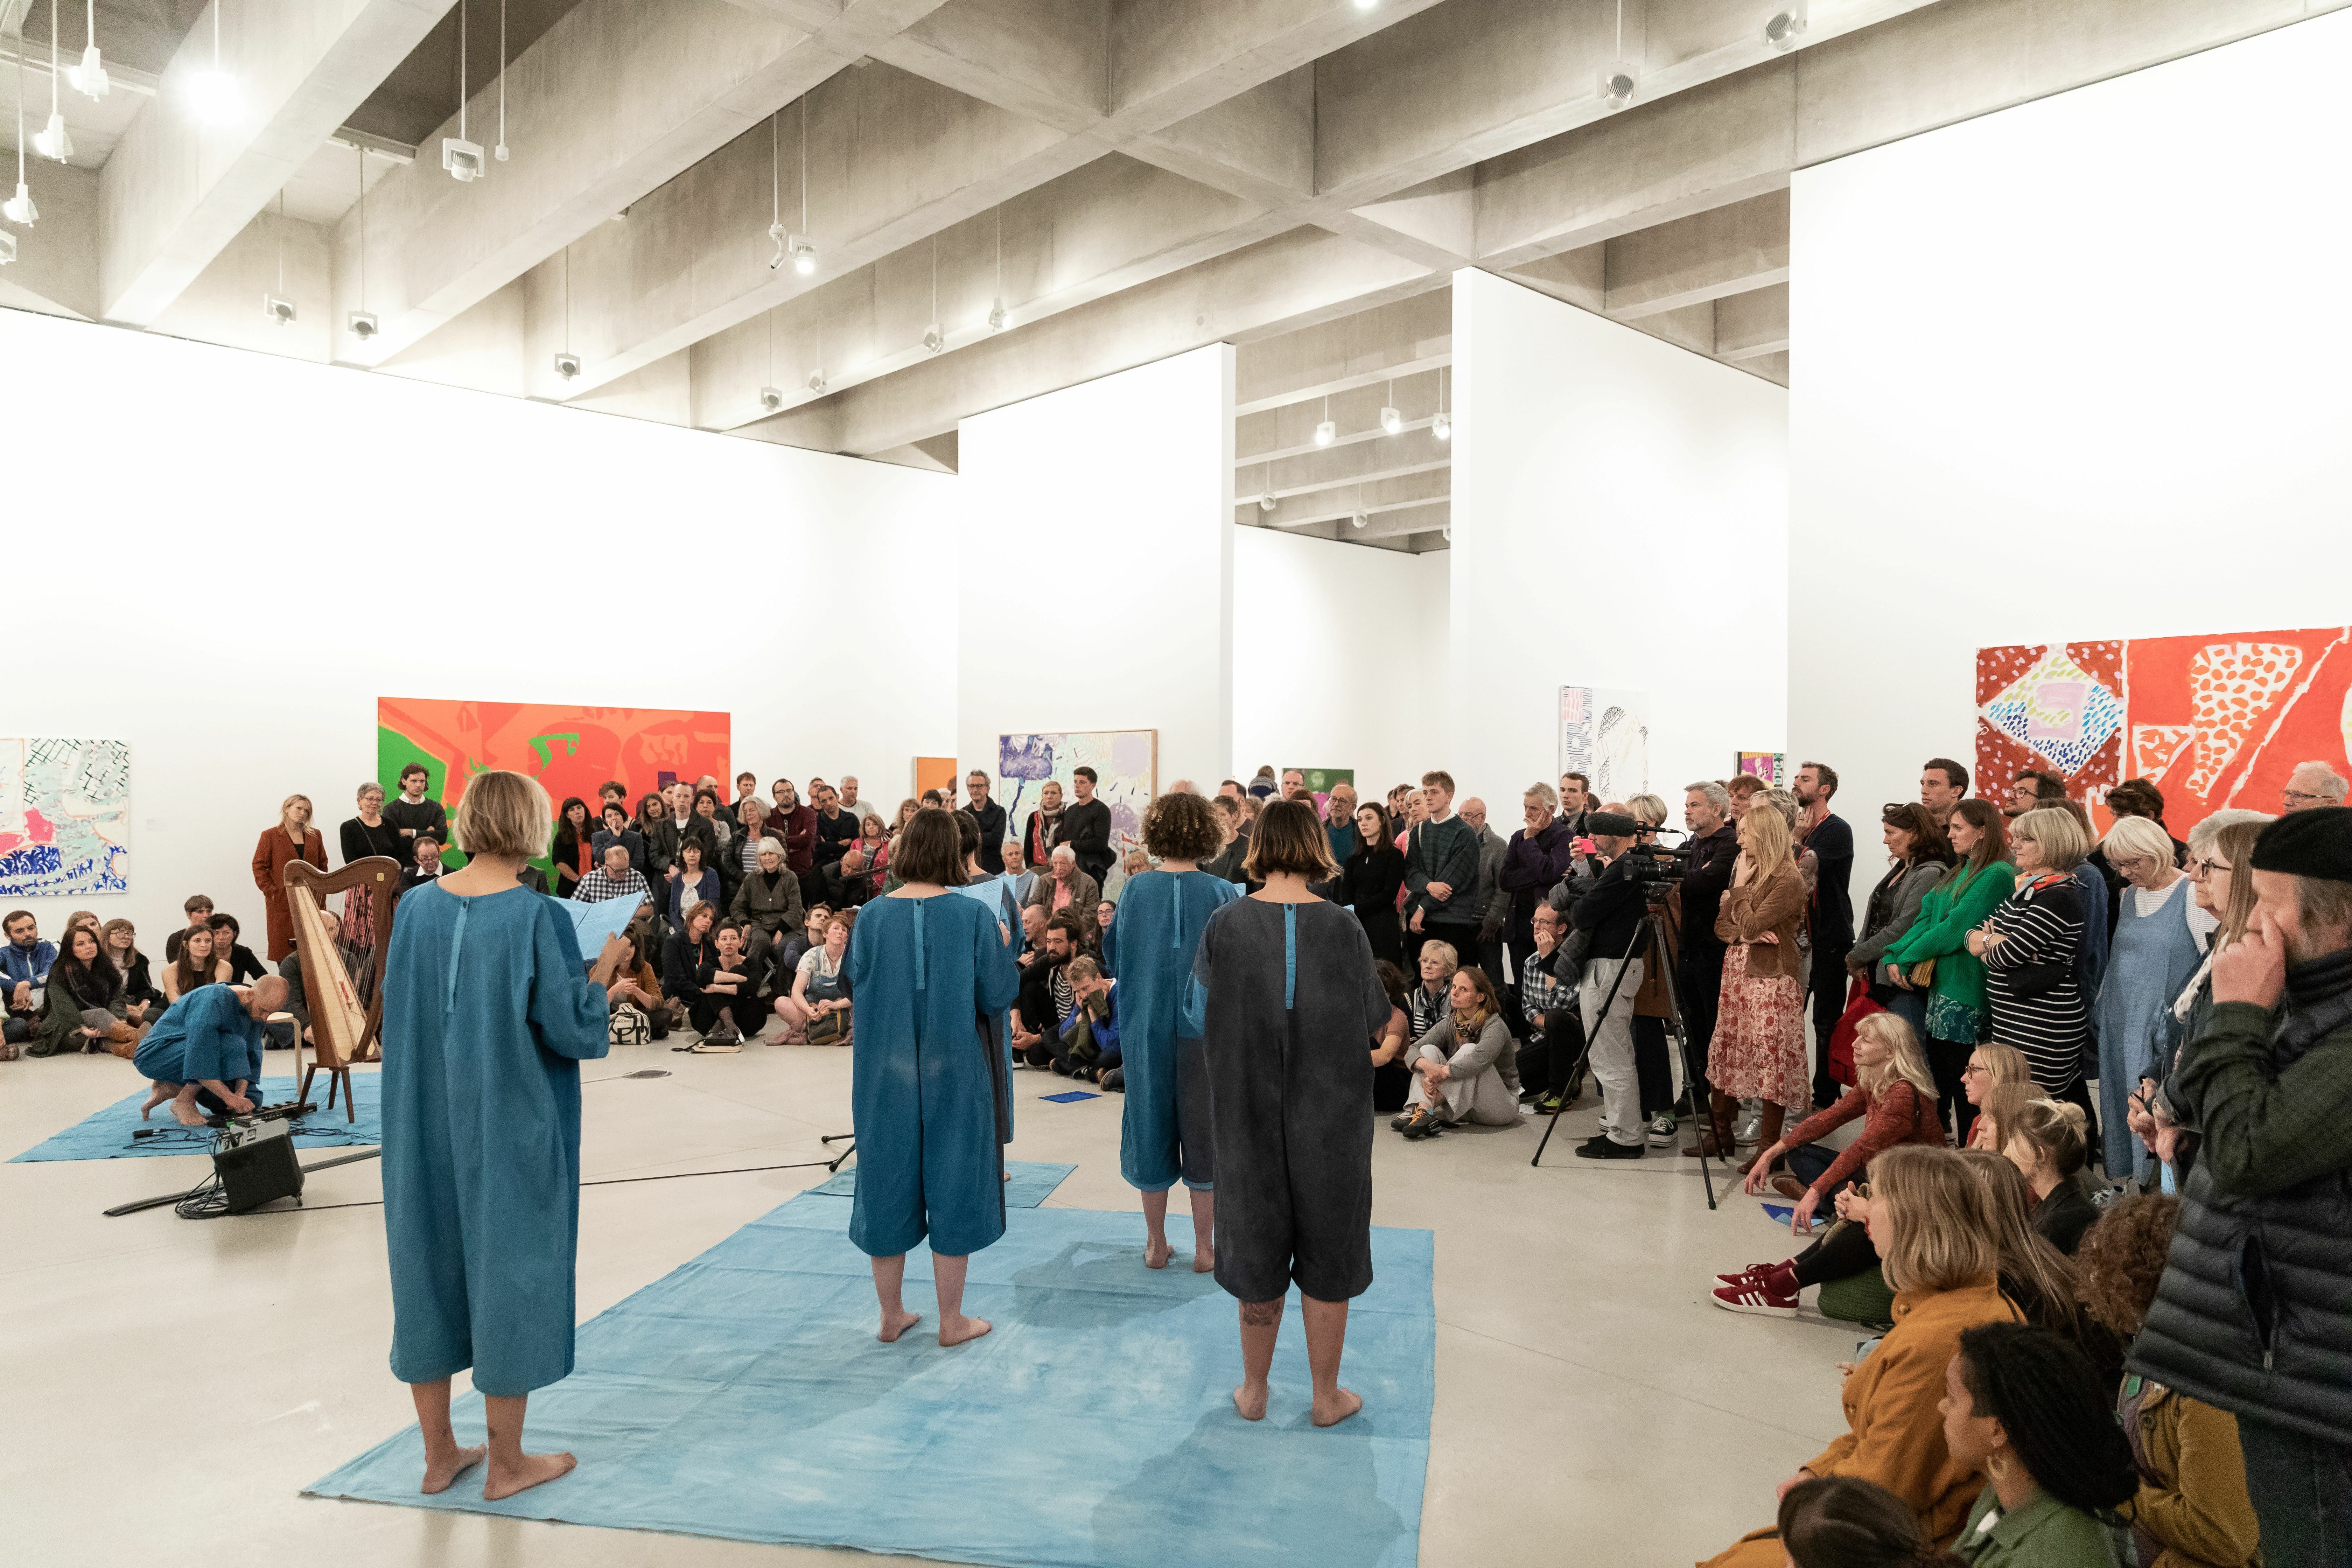 A group of people dressed in blue and grey onesies have their backs to the camera. They are stood on a blue fabric mat holding song booklets facing a crowd of people in a gallery space. To the left a person is crouching, adjusting knobs of a music mixer next to a harp